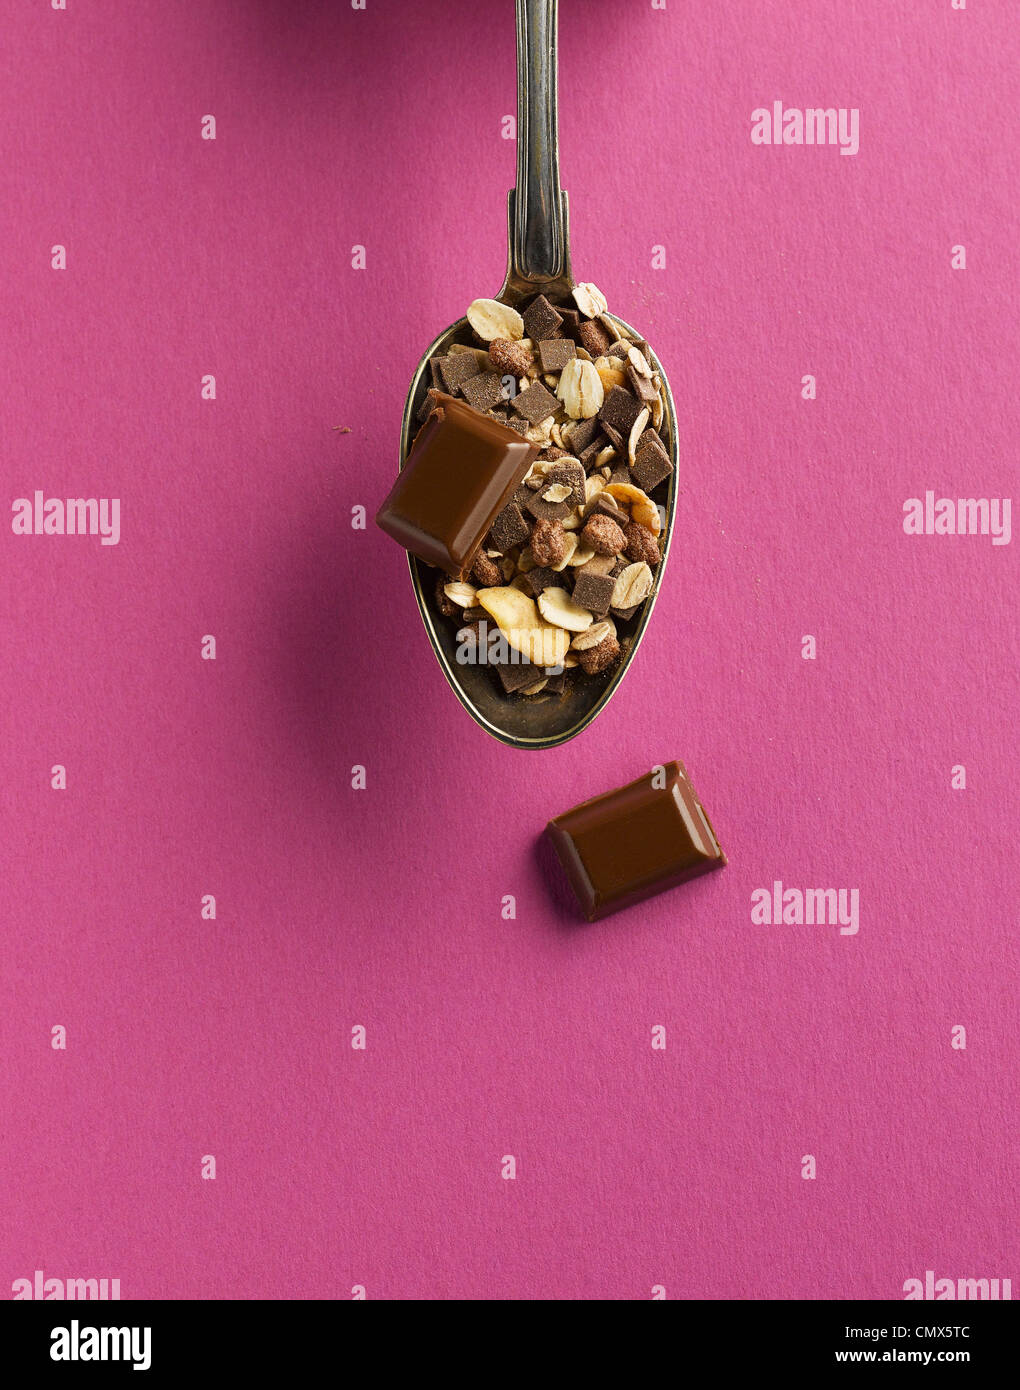 Cereal and chocolate in spoon on pink background Stock Photo